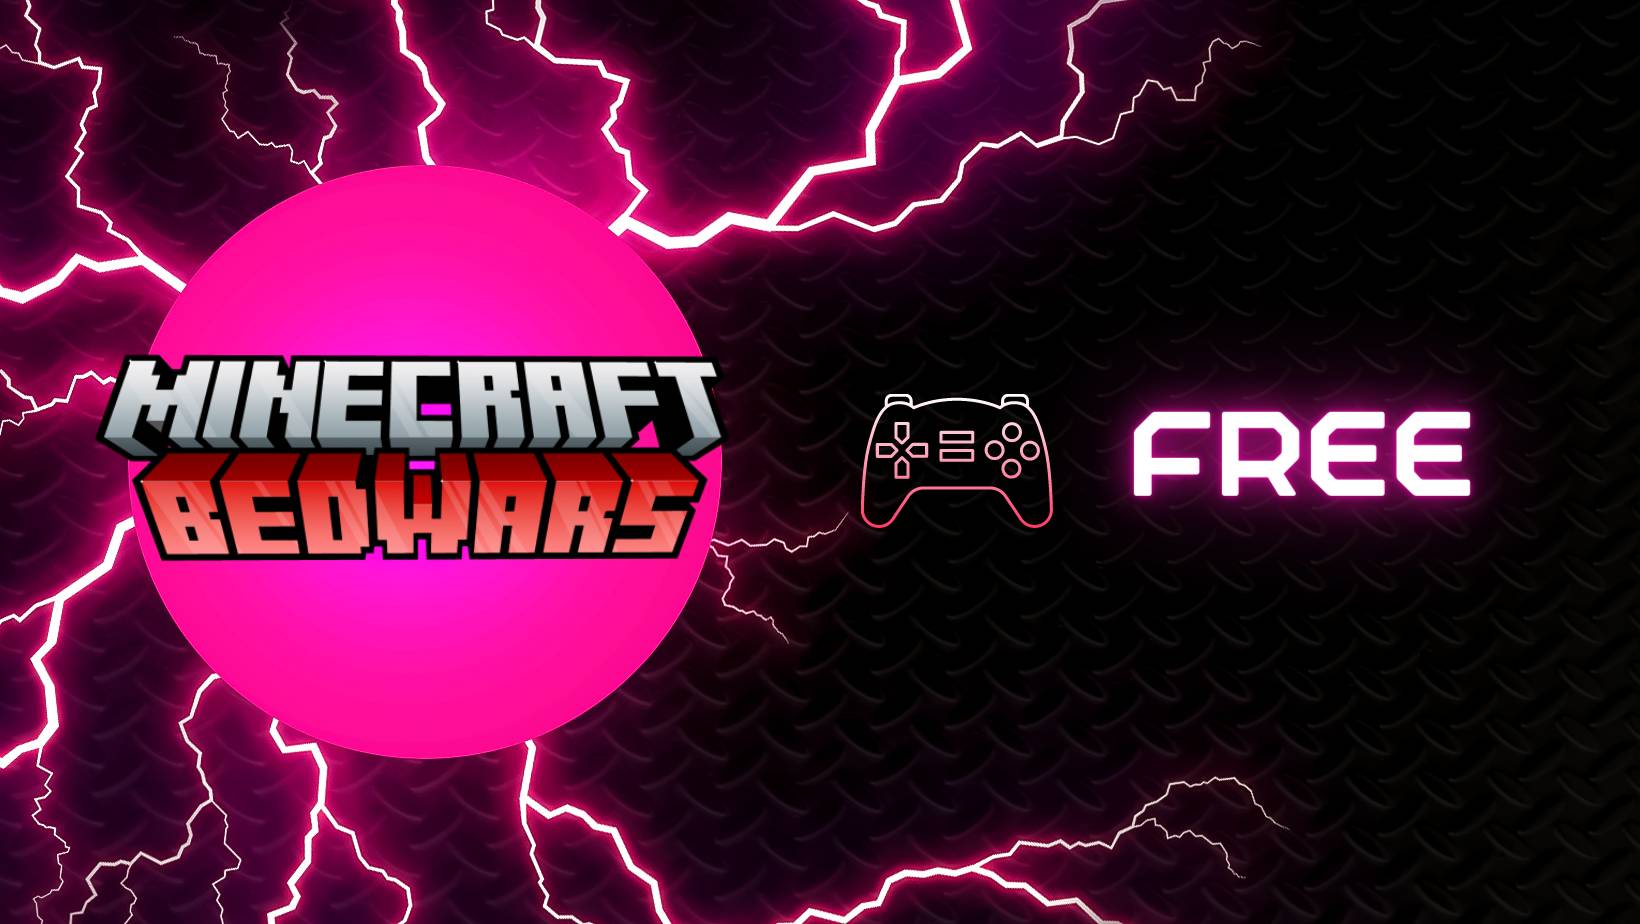 Bedwars Download Free Pc - Colaboratory